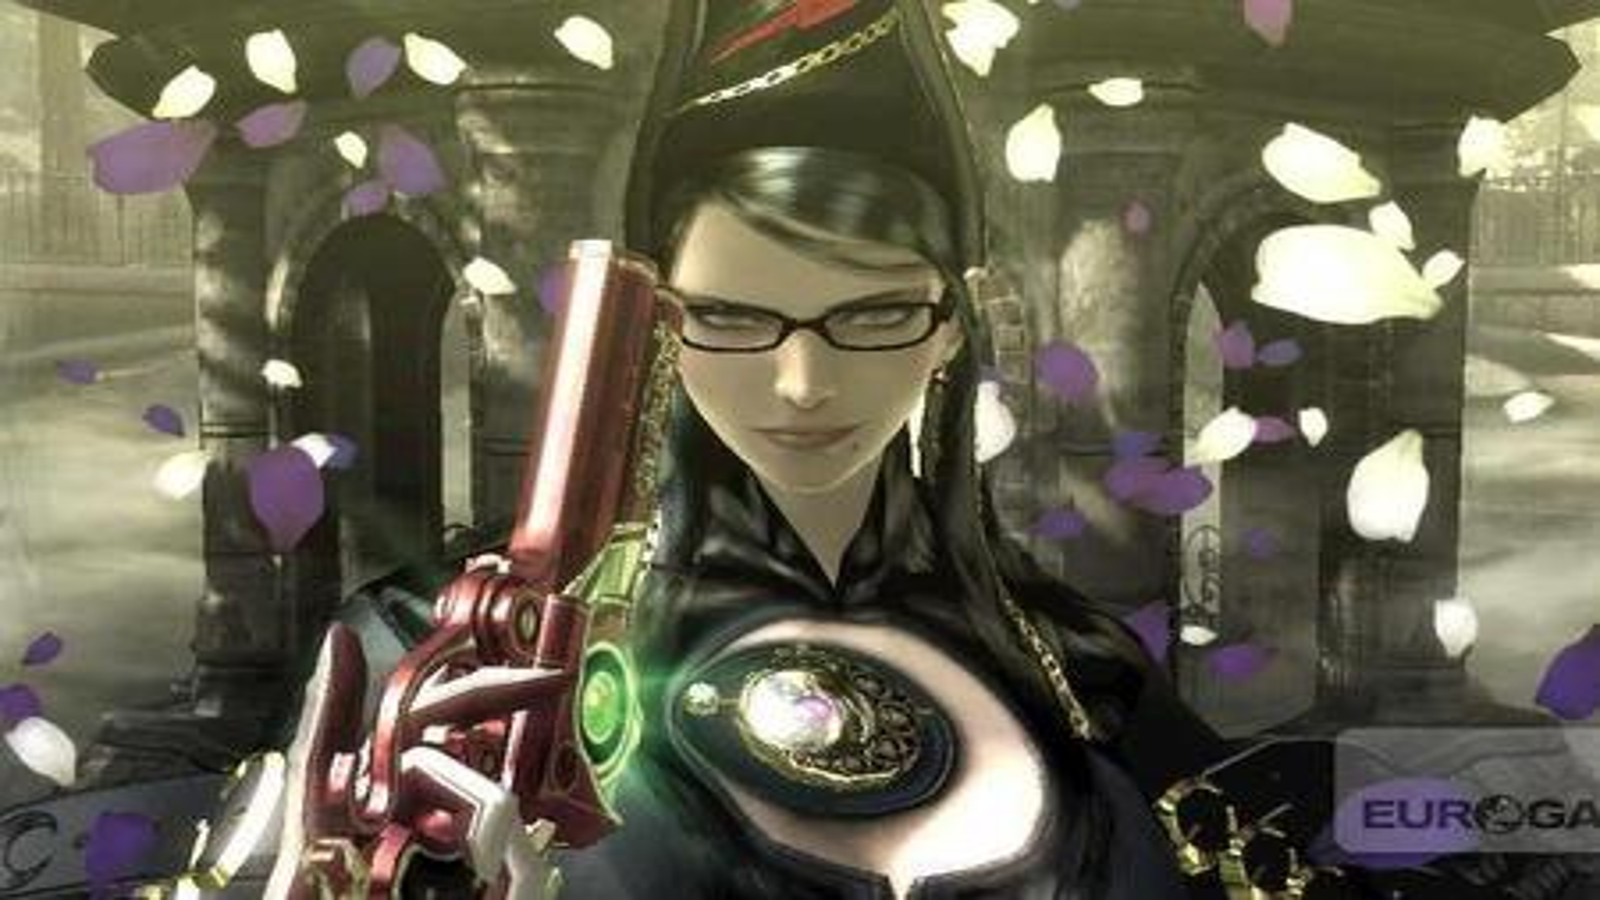 Bayonetta 2 Creators Working on New Project That Will Make Us Say